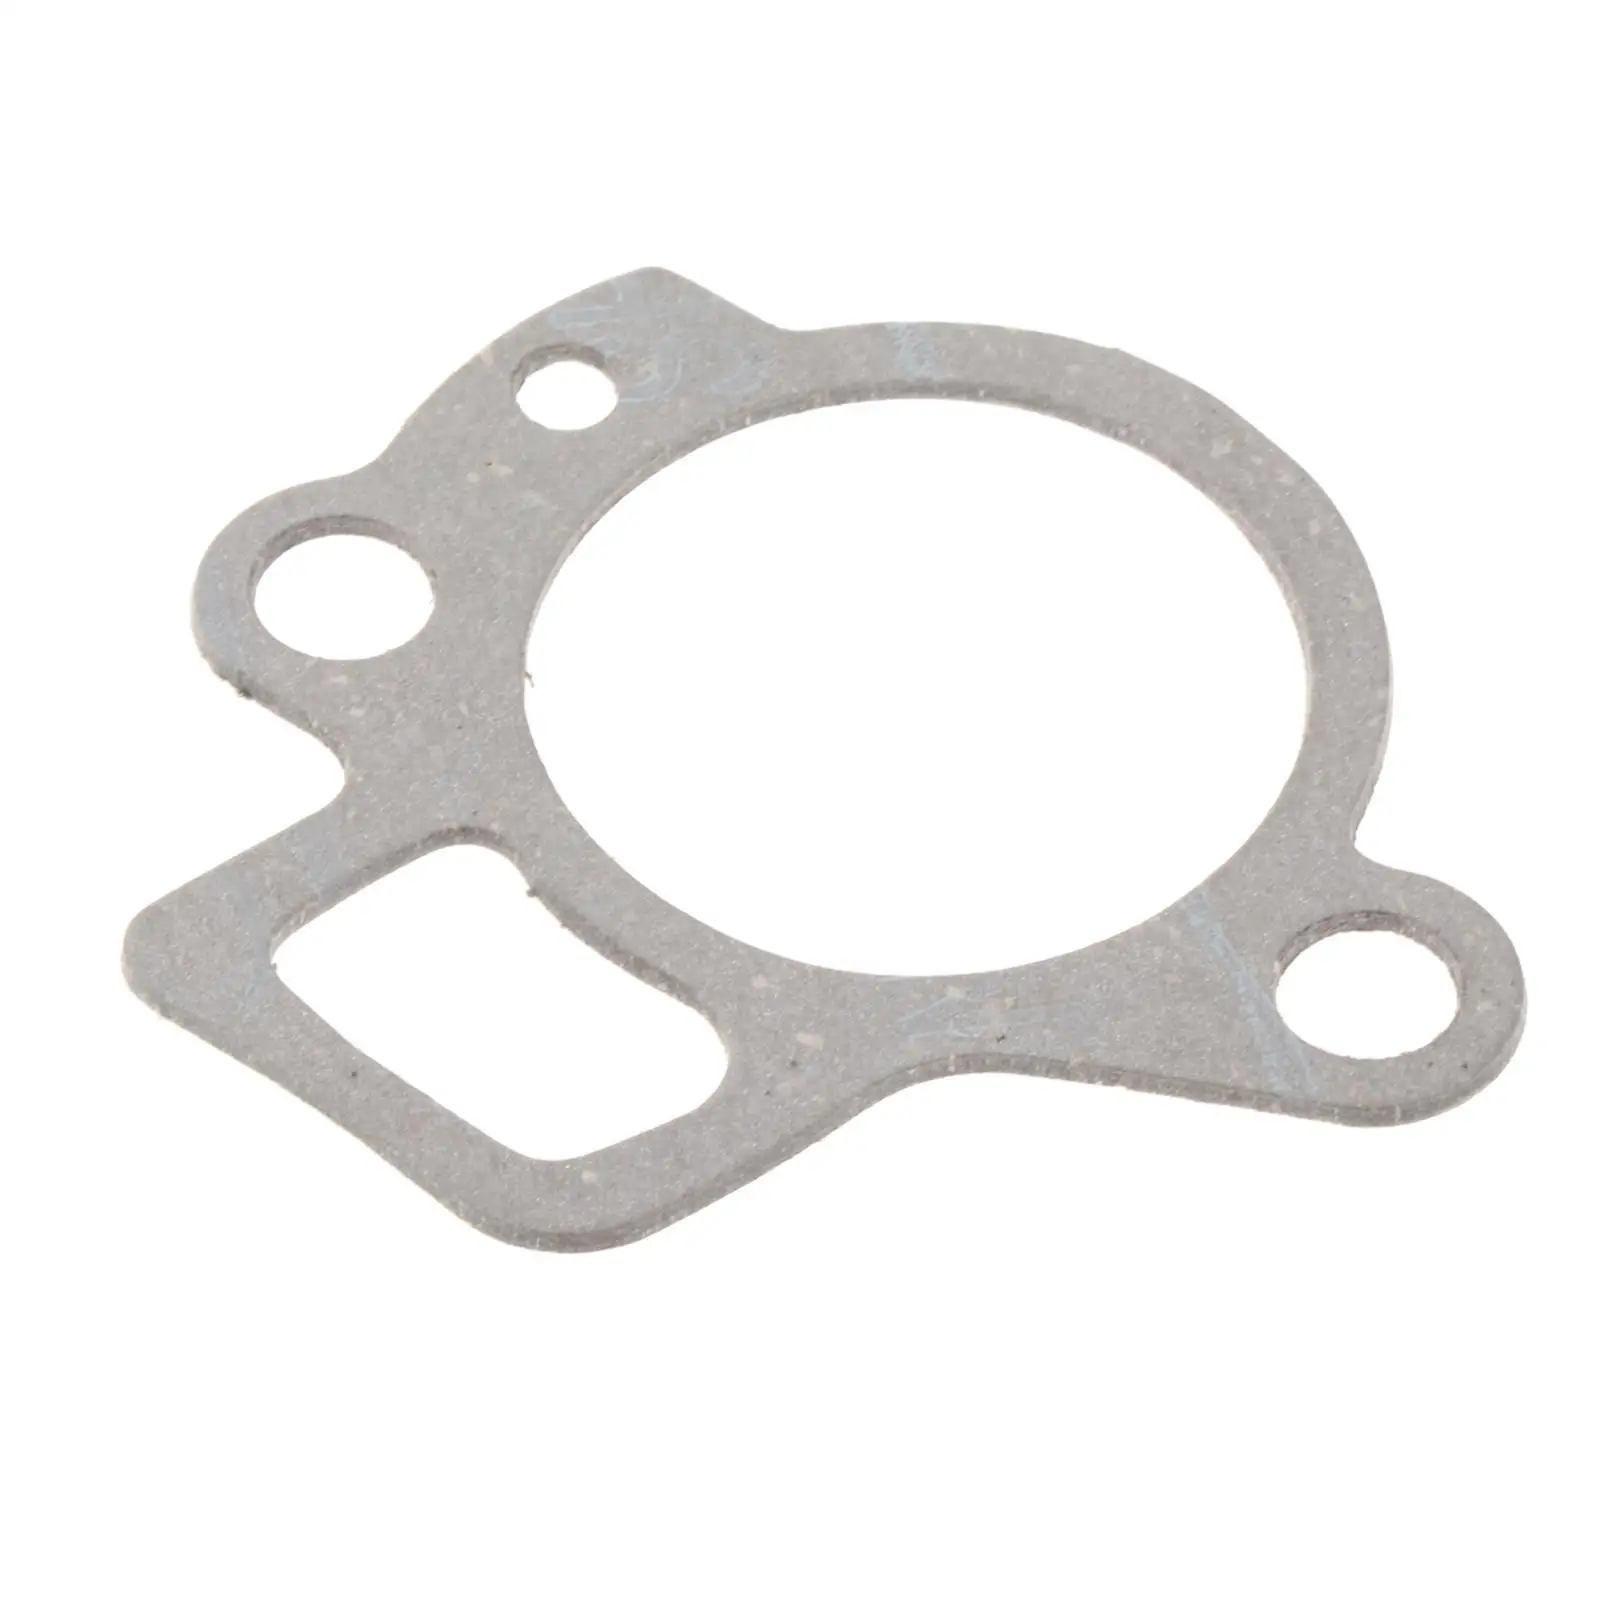 Thermostat Gasket 541-25 6H3-12414-A1 Fit for Yamaha Outboard Engine 9.9-70 HP Replacement High Performance Accessories